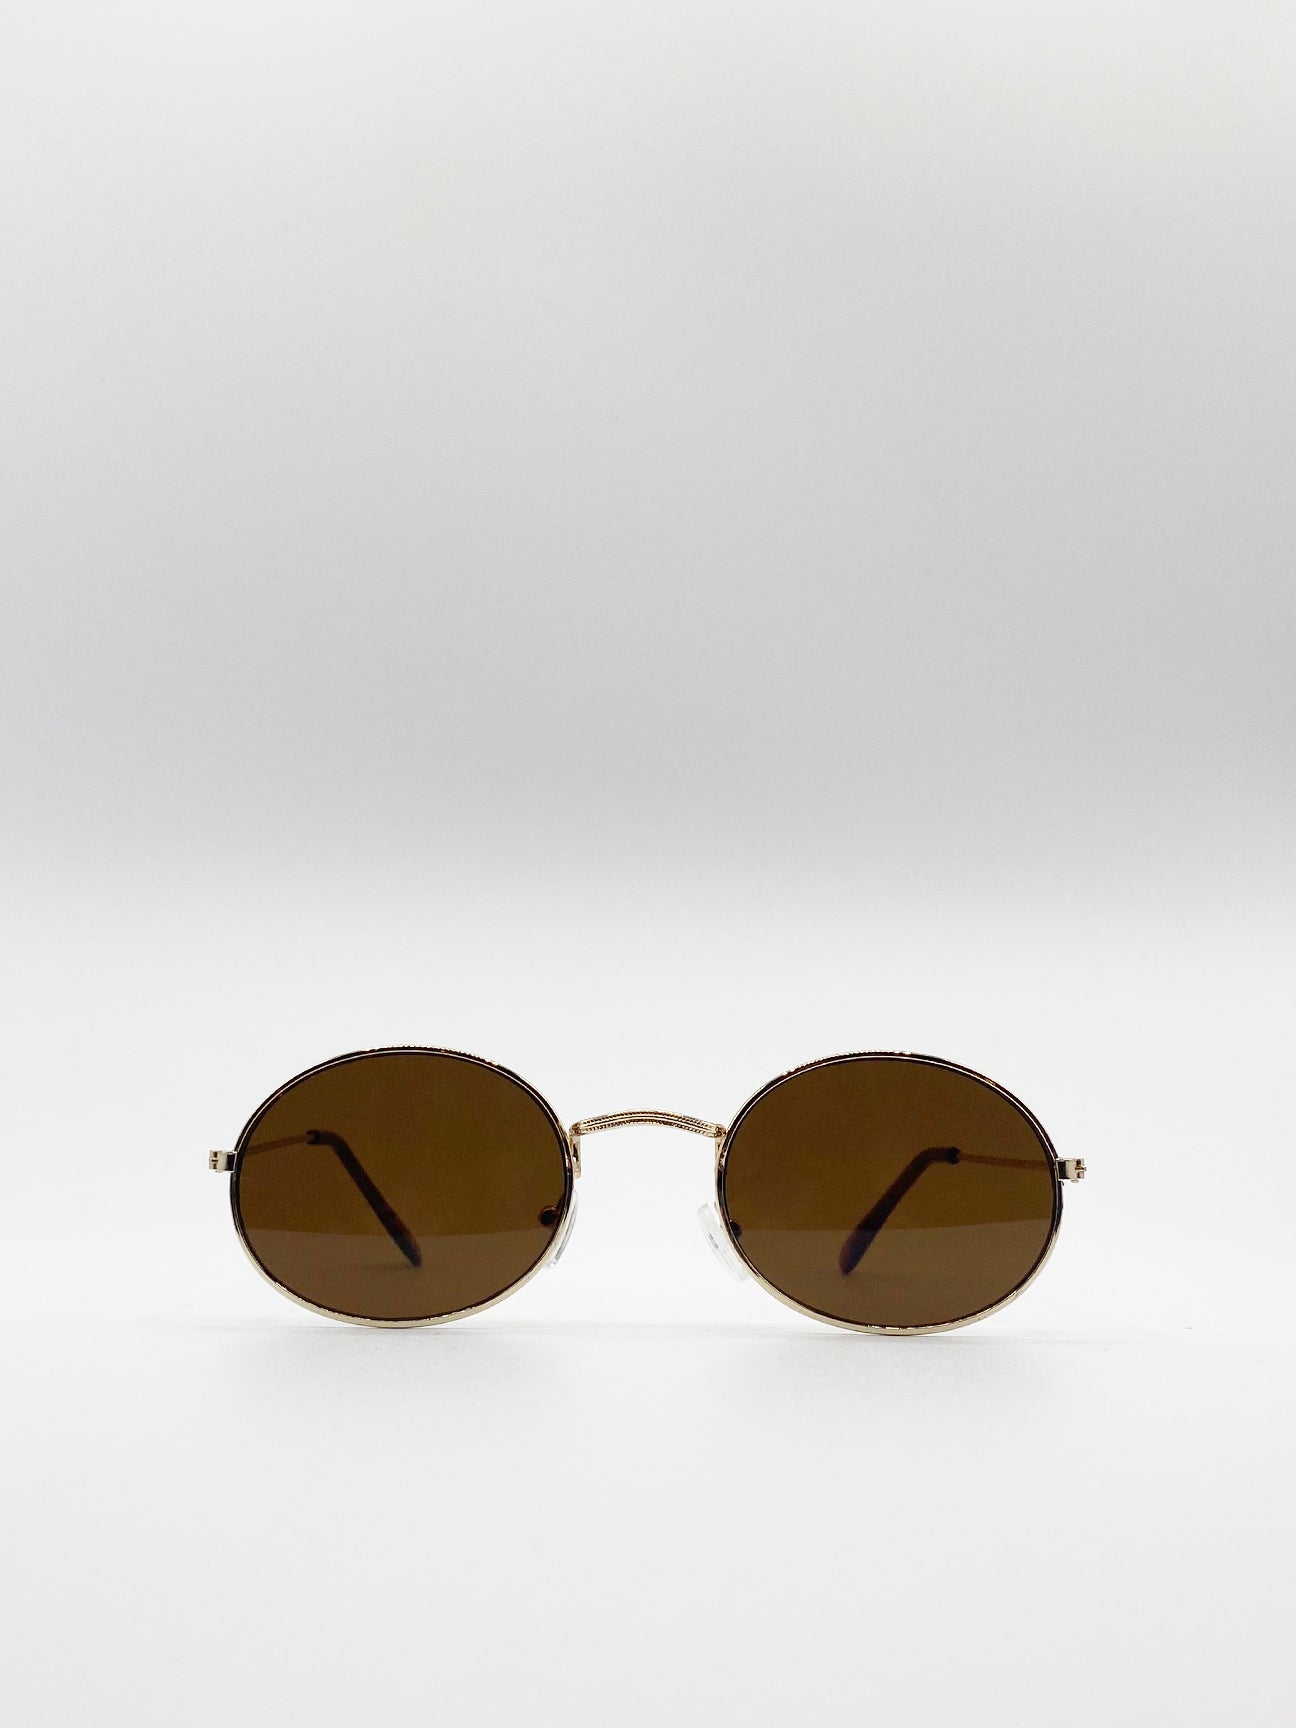 Gold Metal Round Sunglasses with Brown Lenses